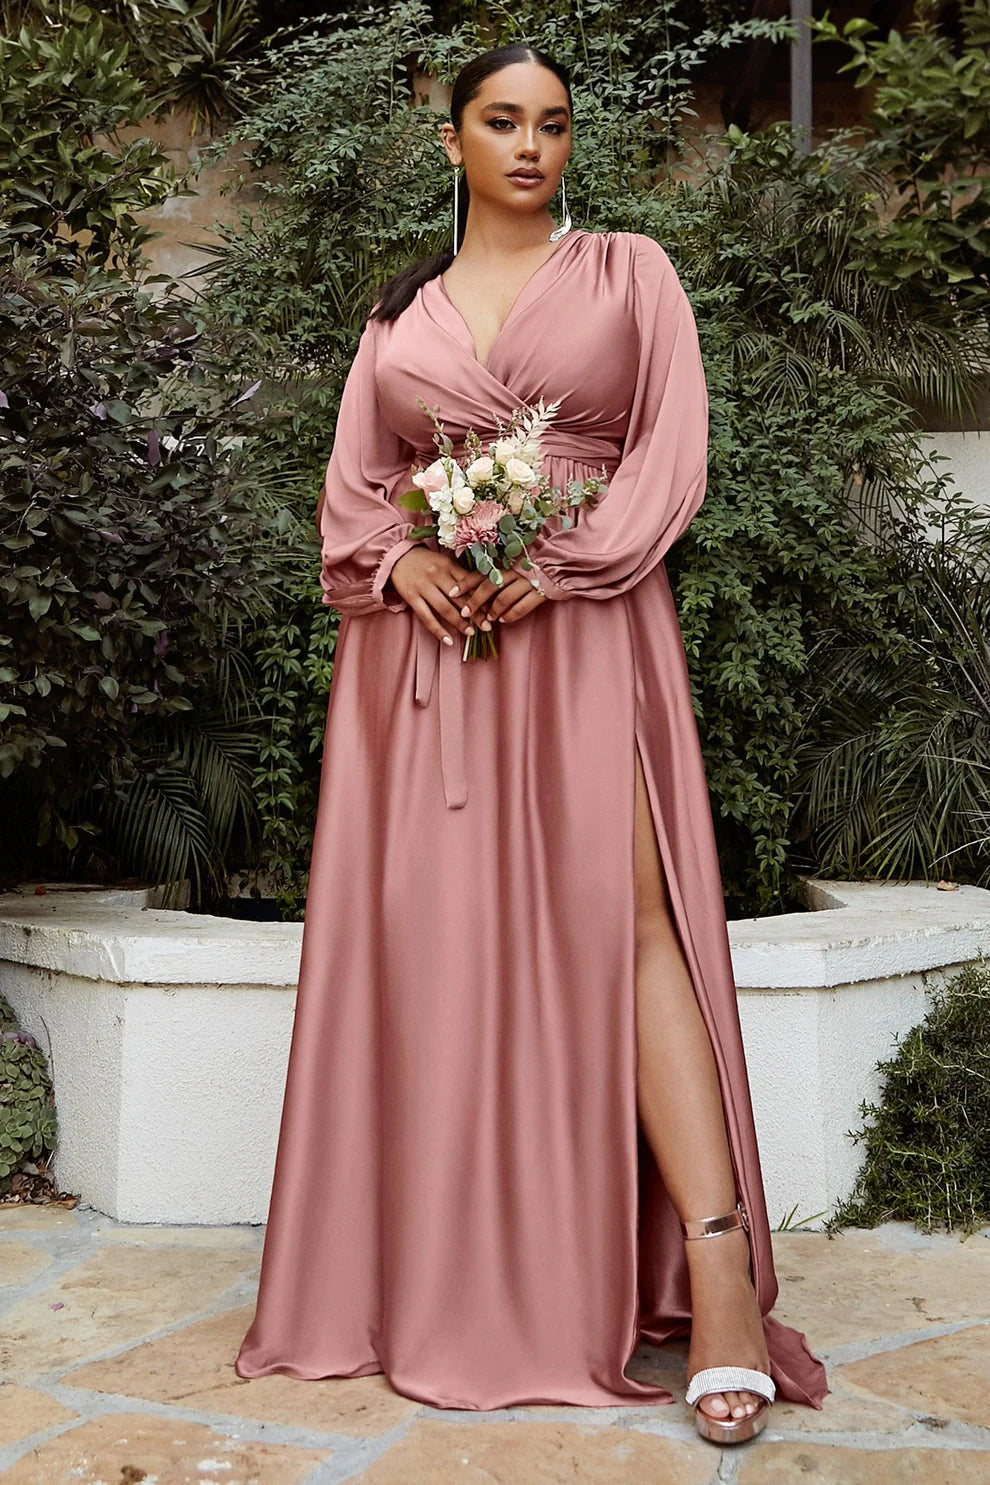 Online Guide to Finding Your Ideal Plus Size Formal Dress – The Dress Outlet